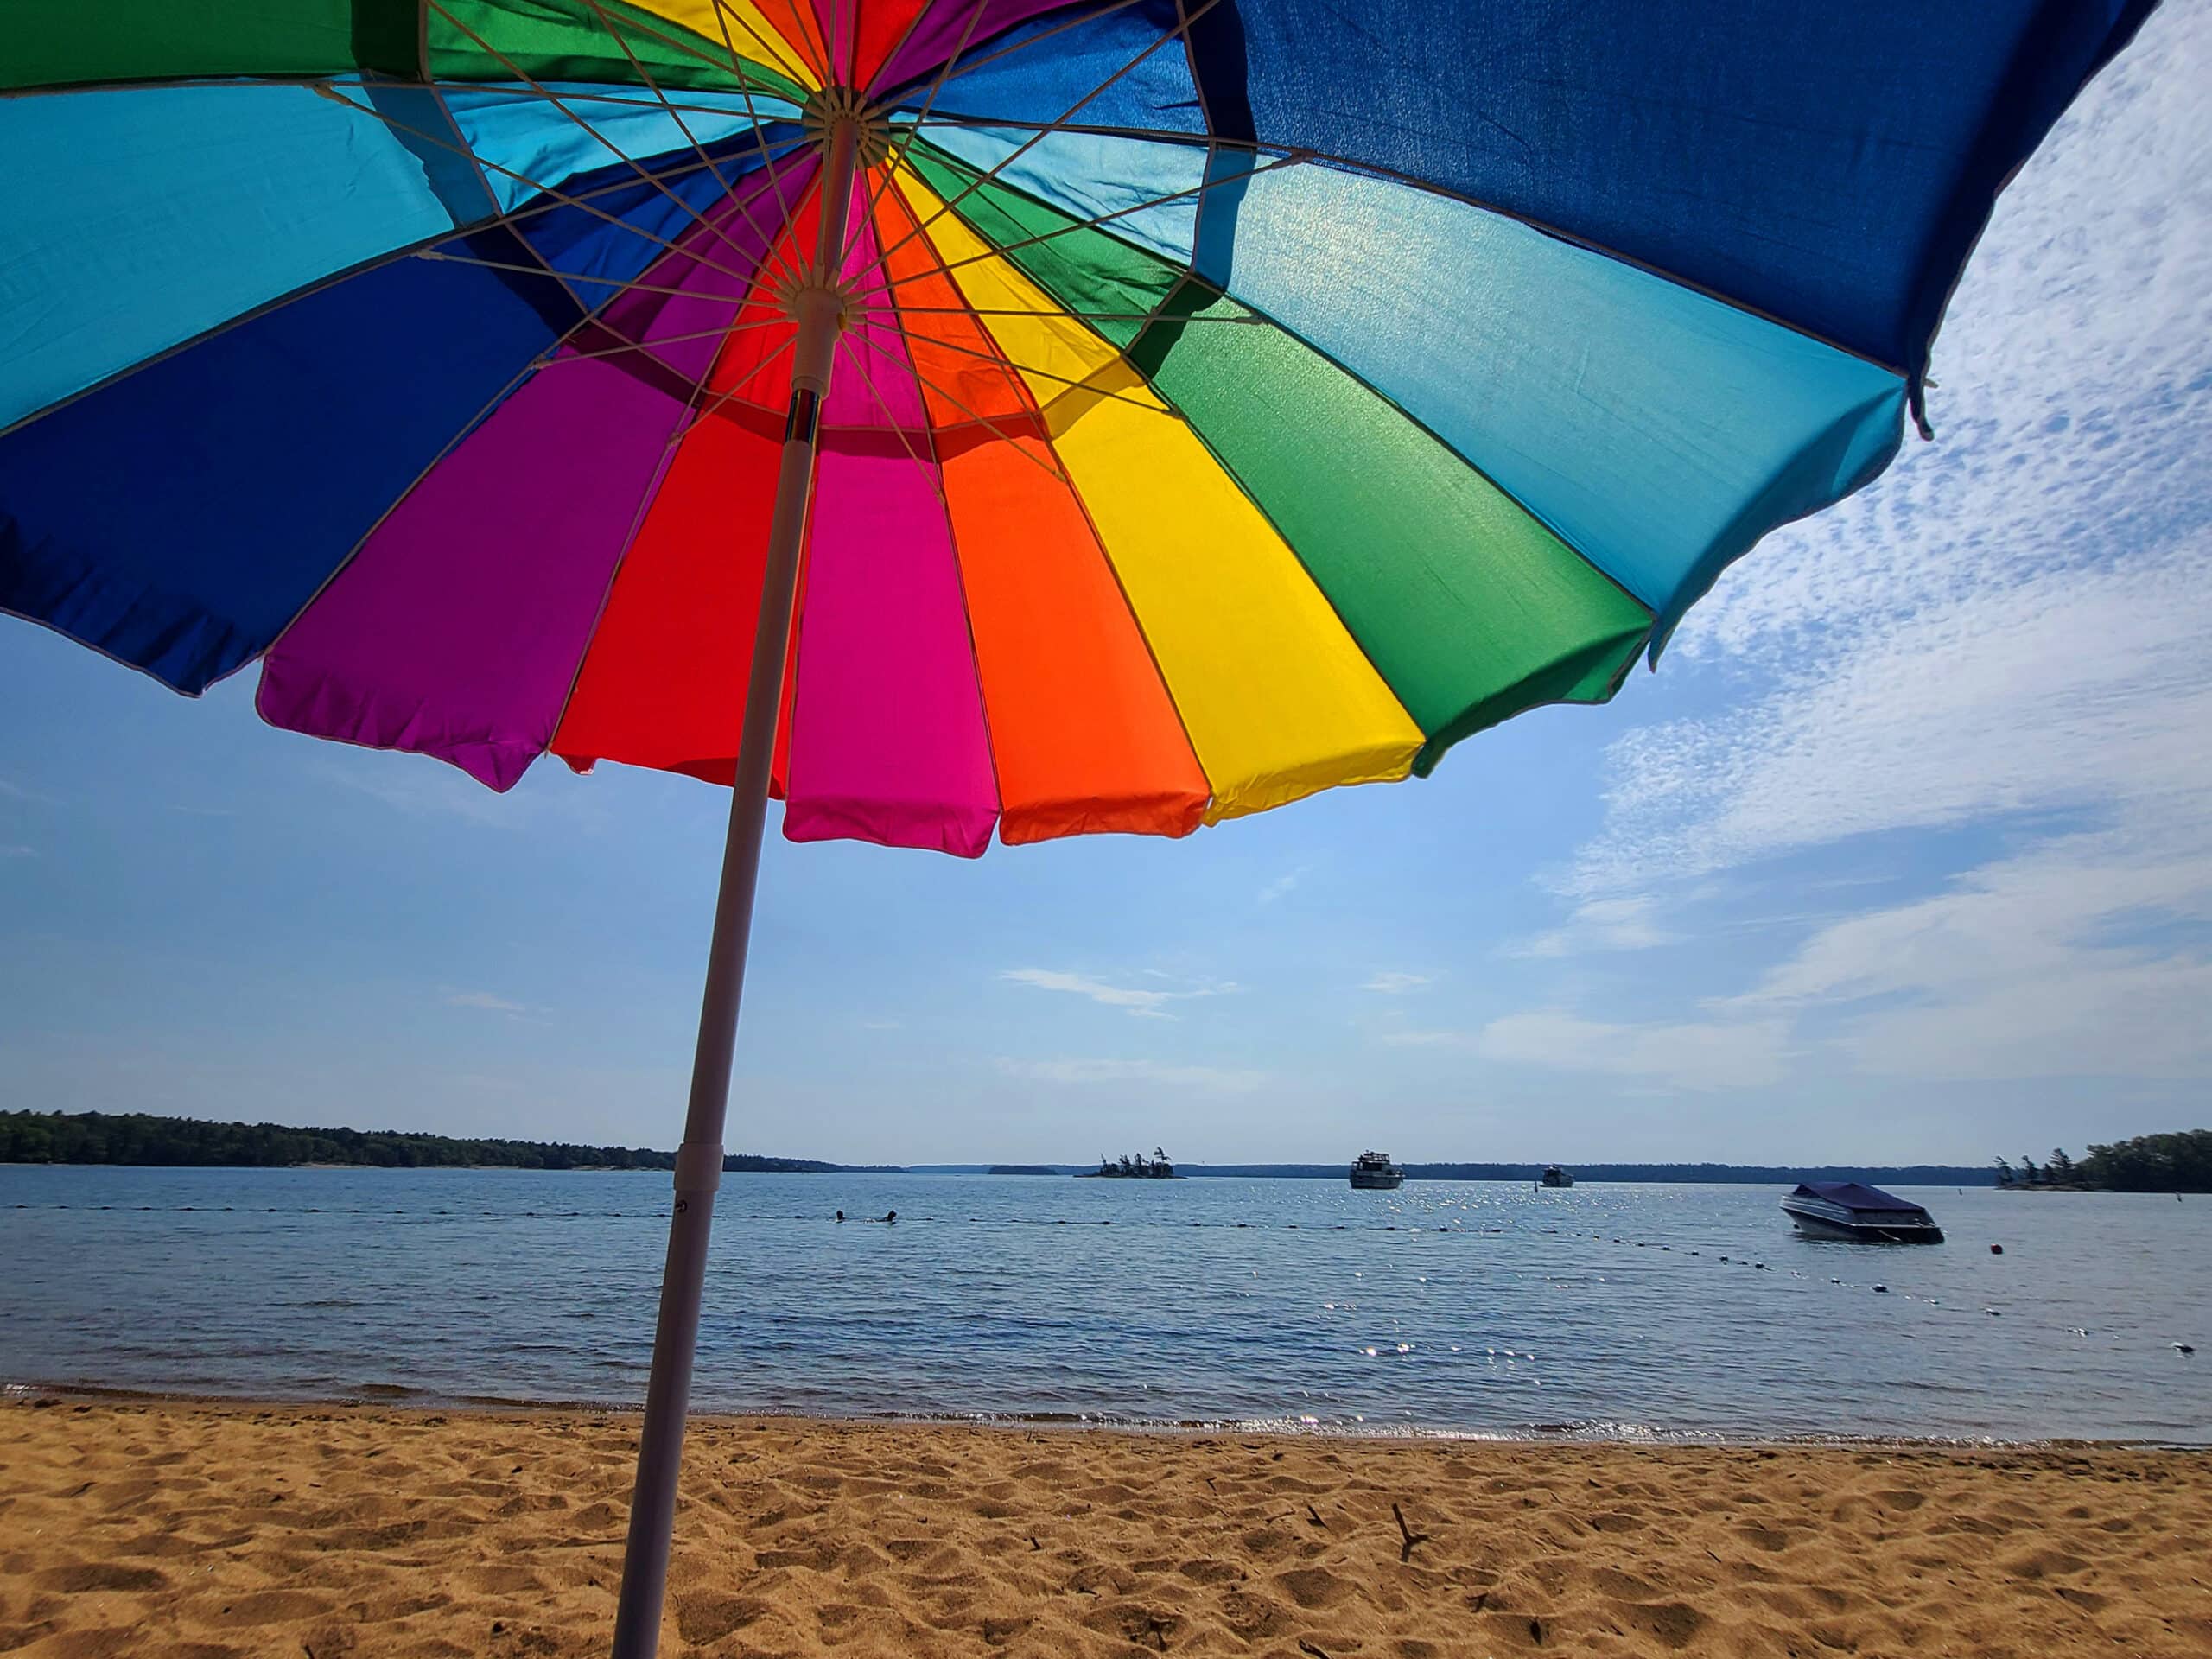 The beach and lake at Kilcoursie Bay.  A rainbow coloured beach umbrella is in the foreground.